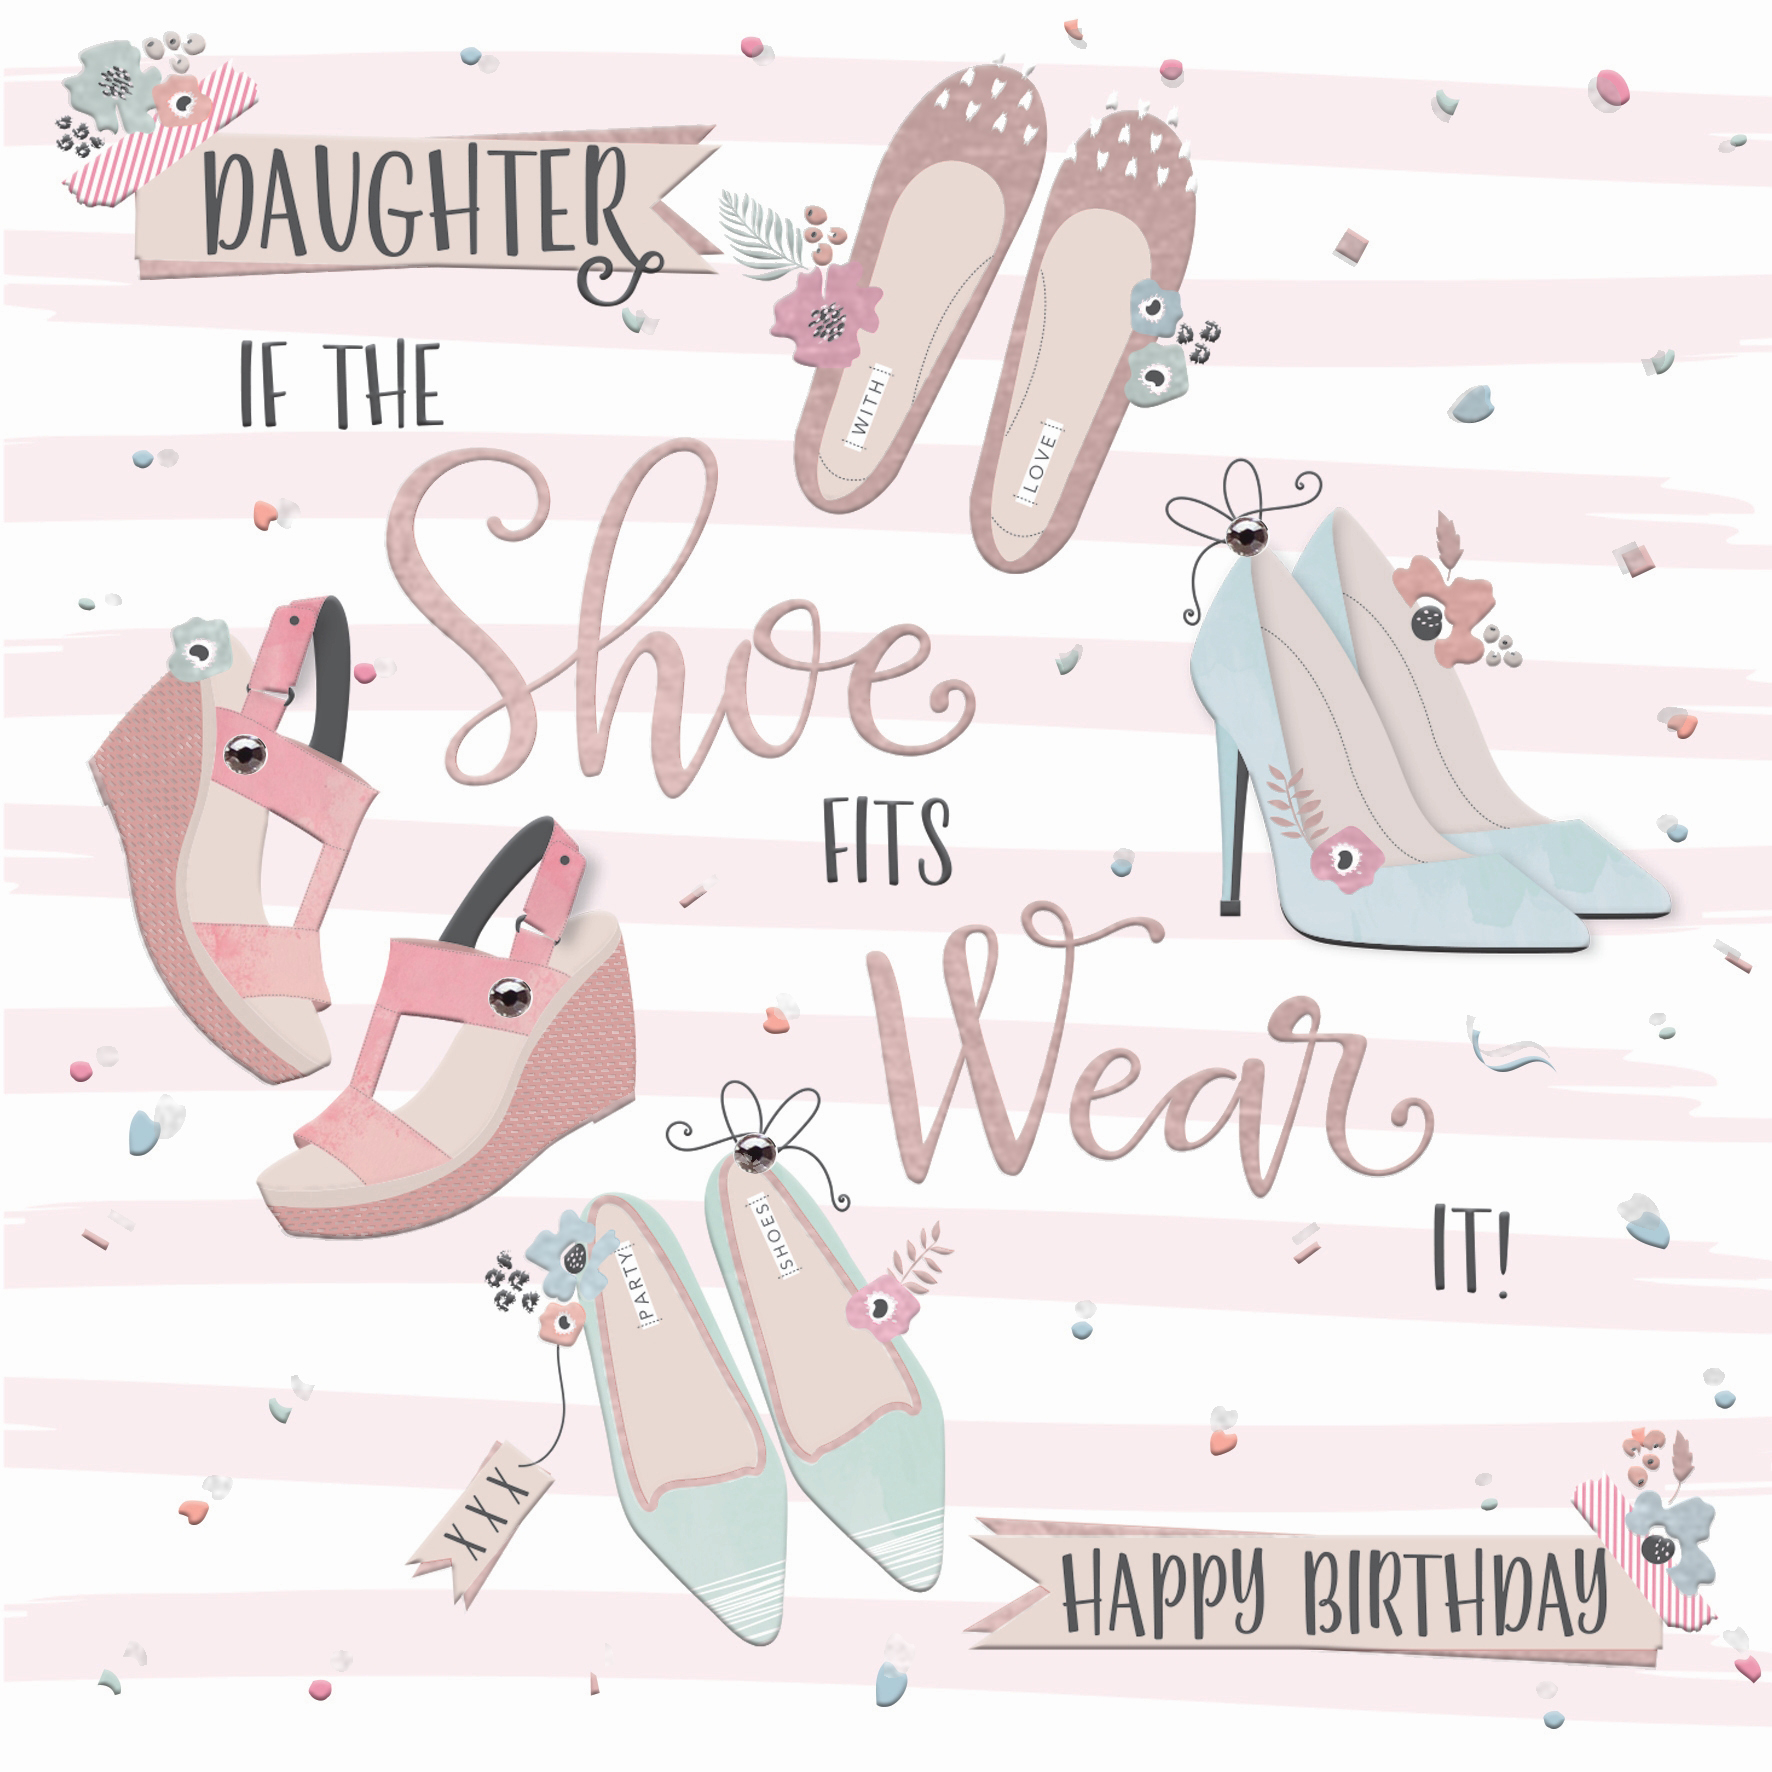 Daughter, if the shoe fits, wear it! Happy Birthday